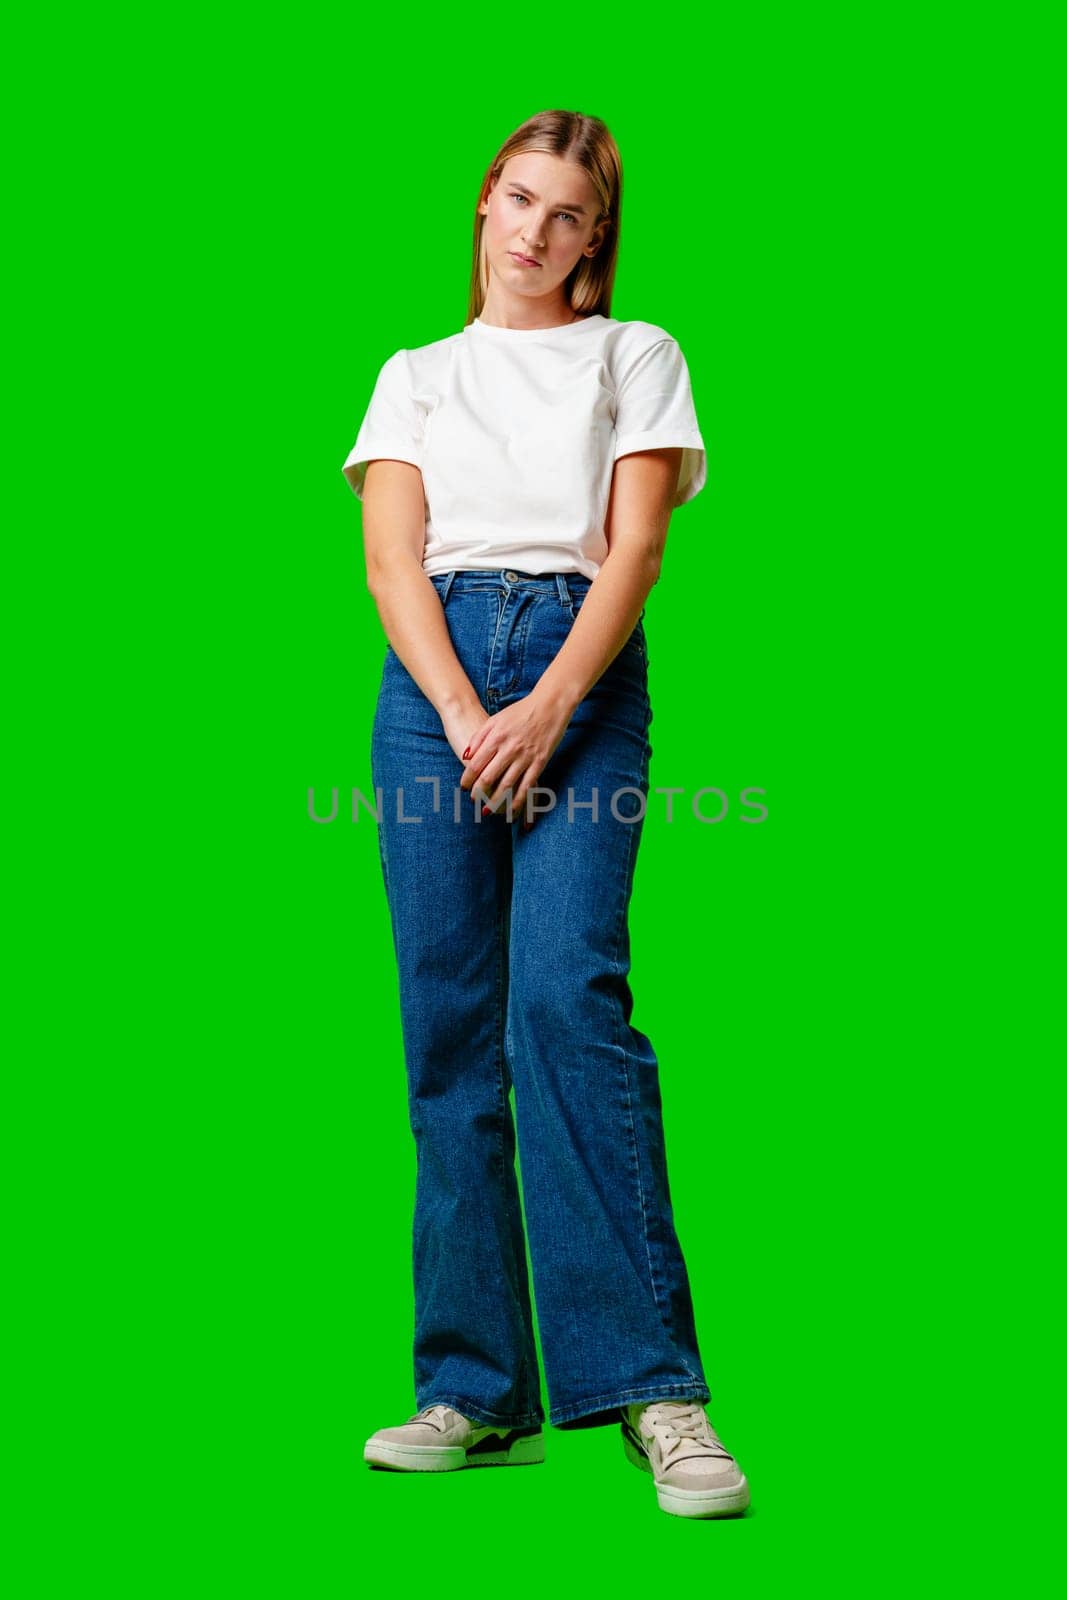 Young Woman With Pursed Lips Expressing Skepticism Against Green Screen Background in studio